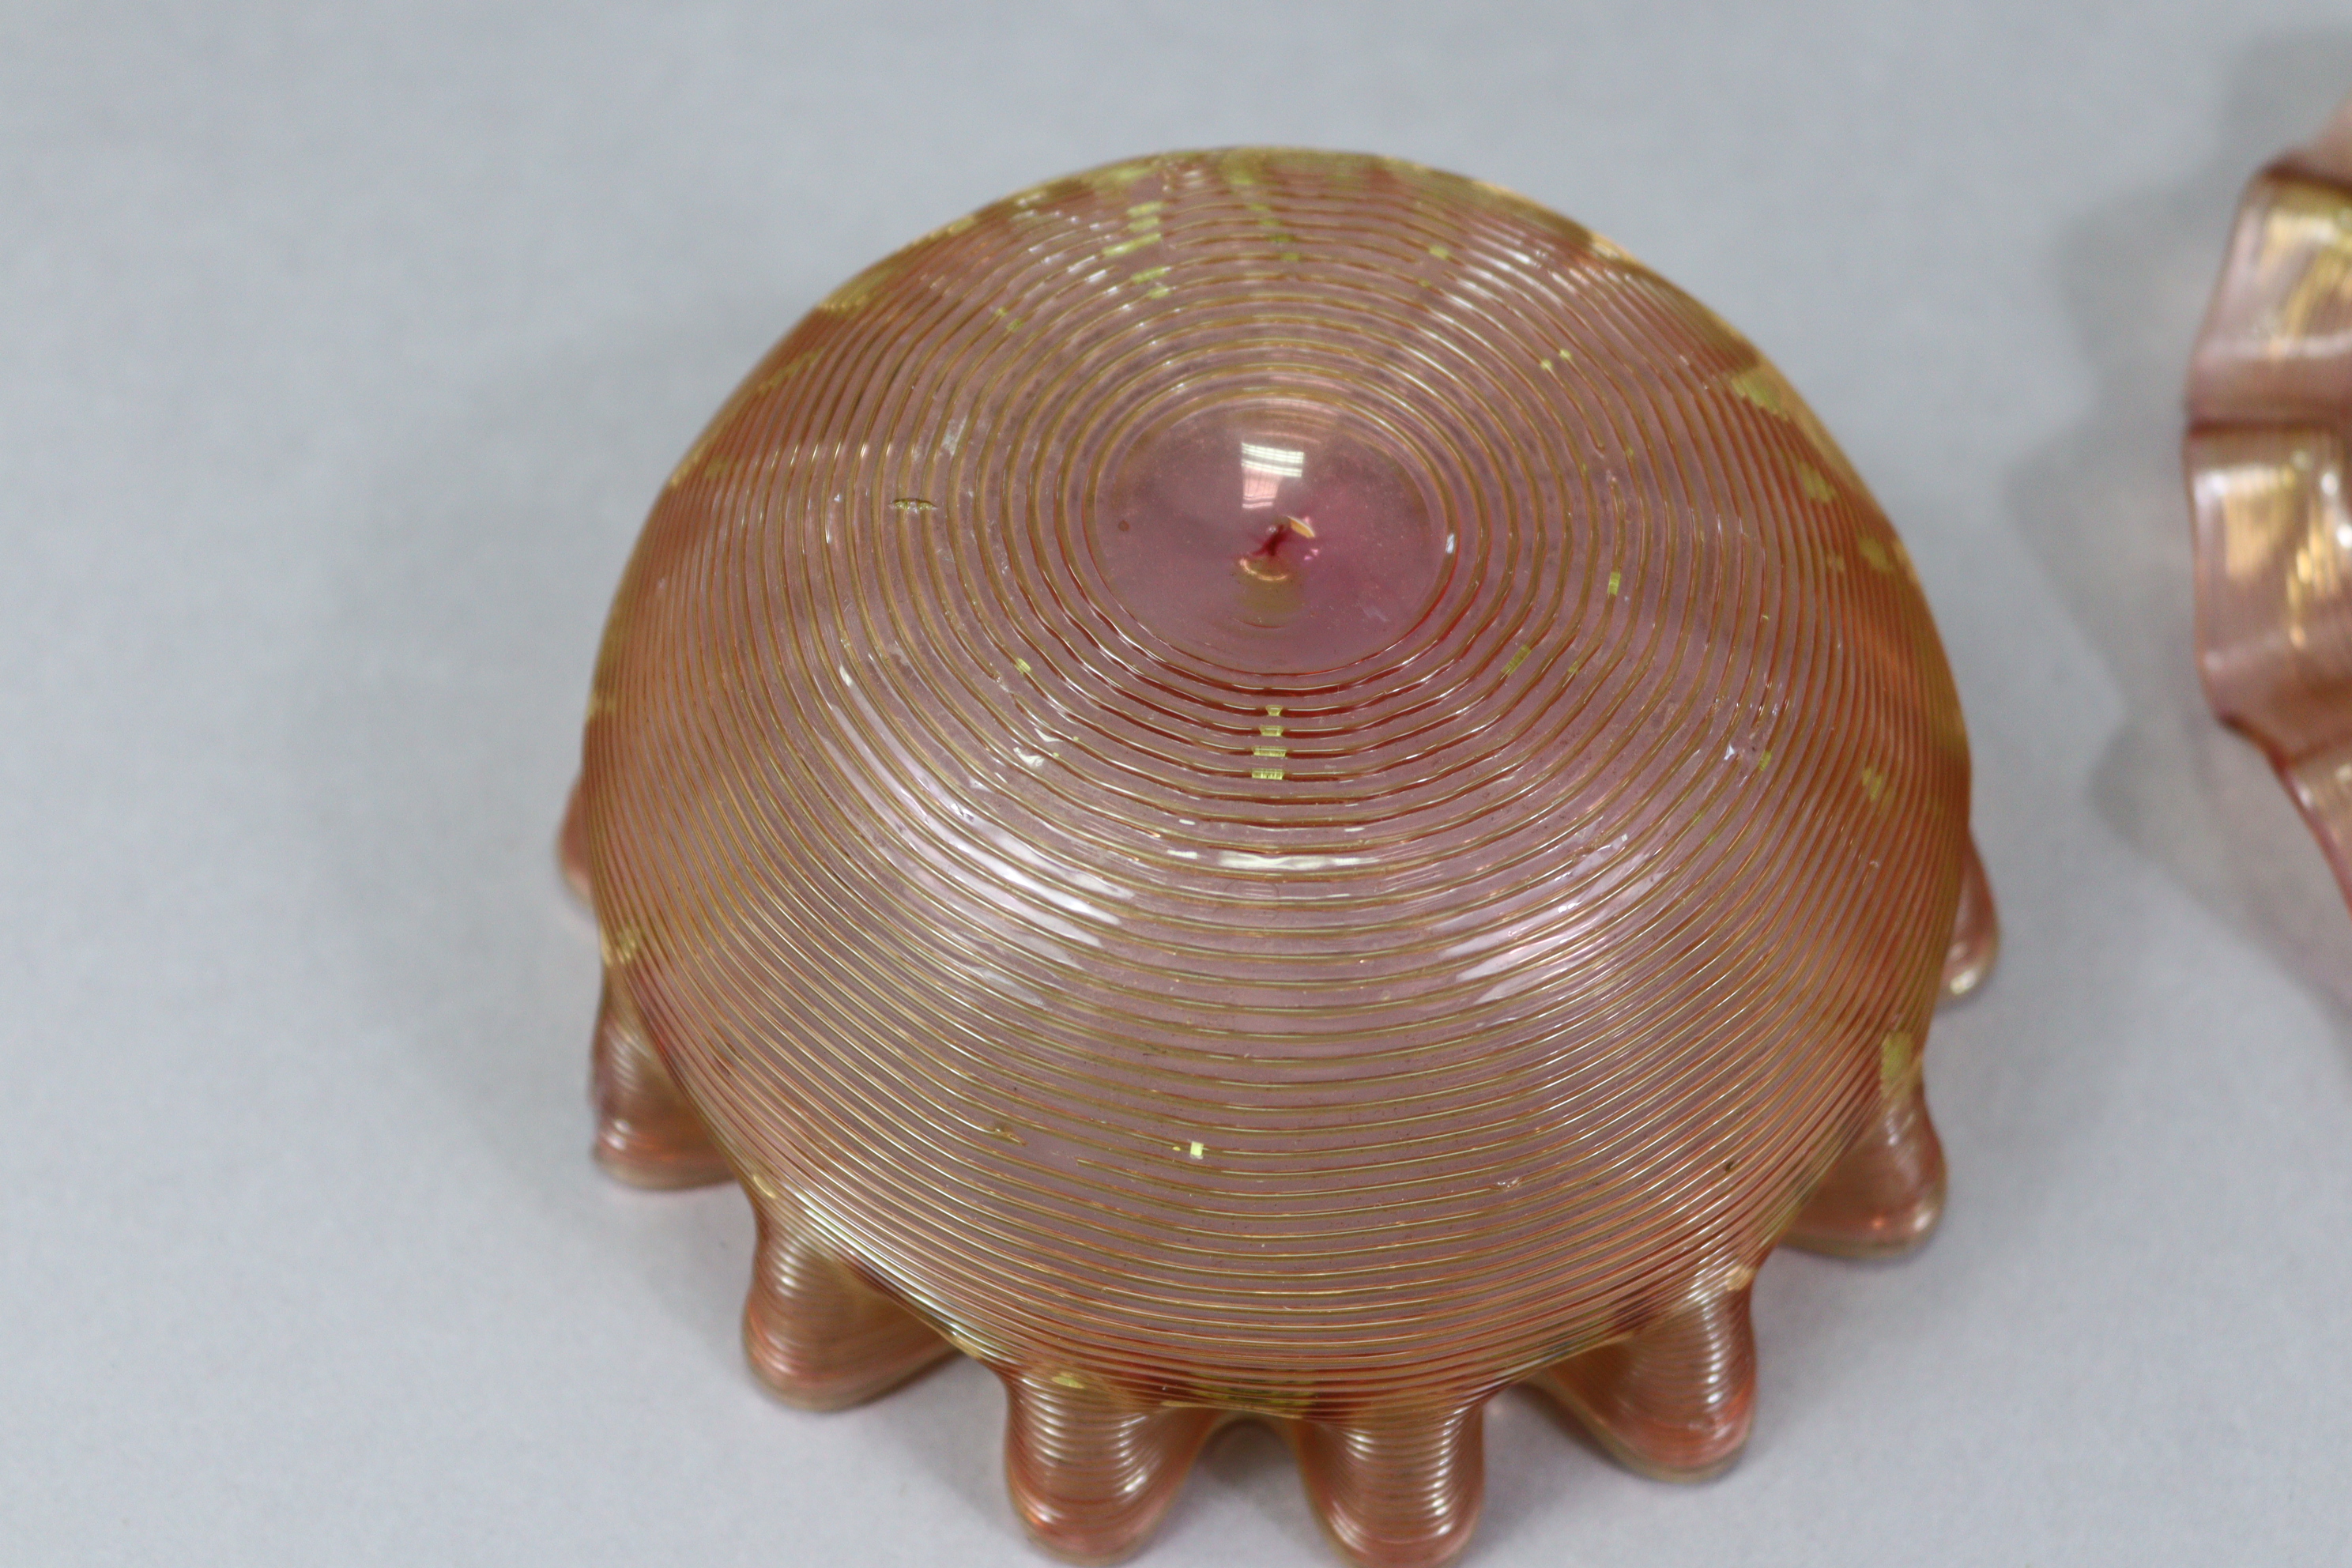 A set of five Venetian glass bowls, 5” diam., each with stand; & a similar smaller bowl. - Image 3 of 3